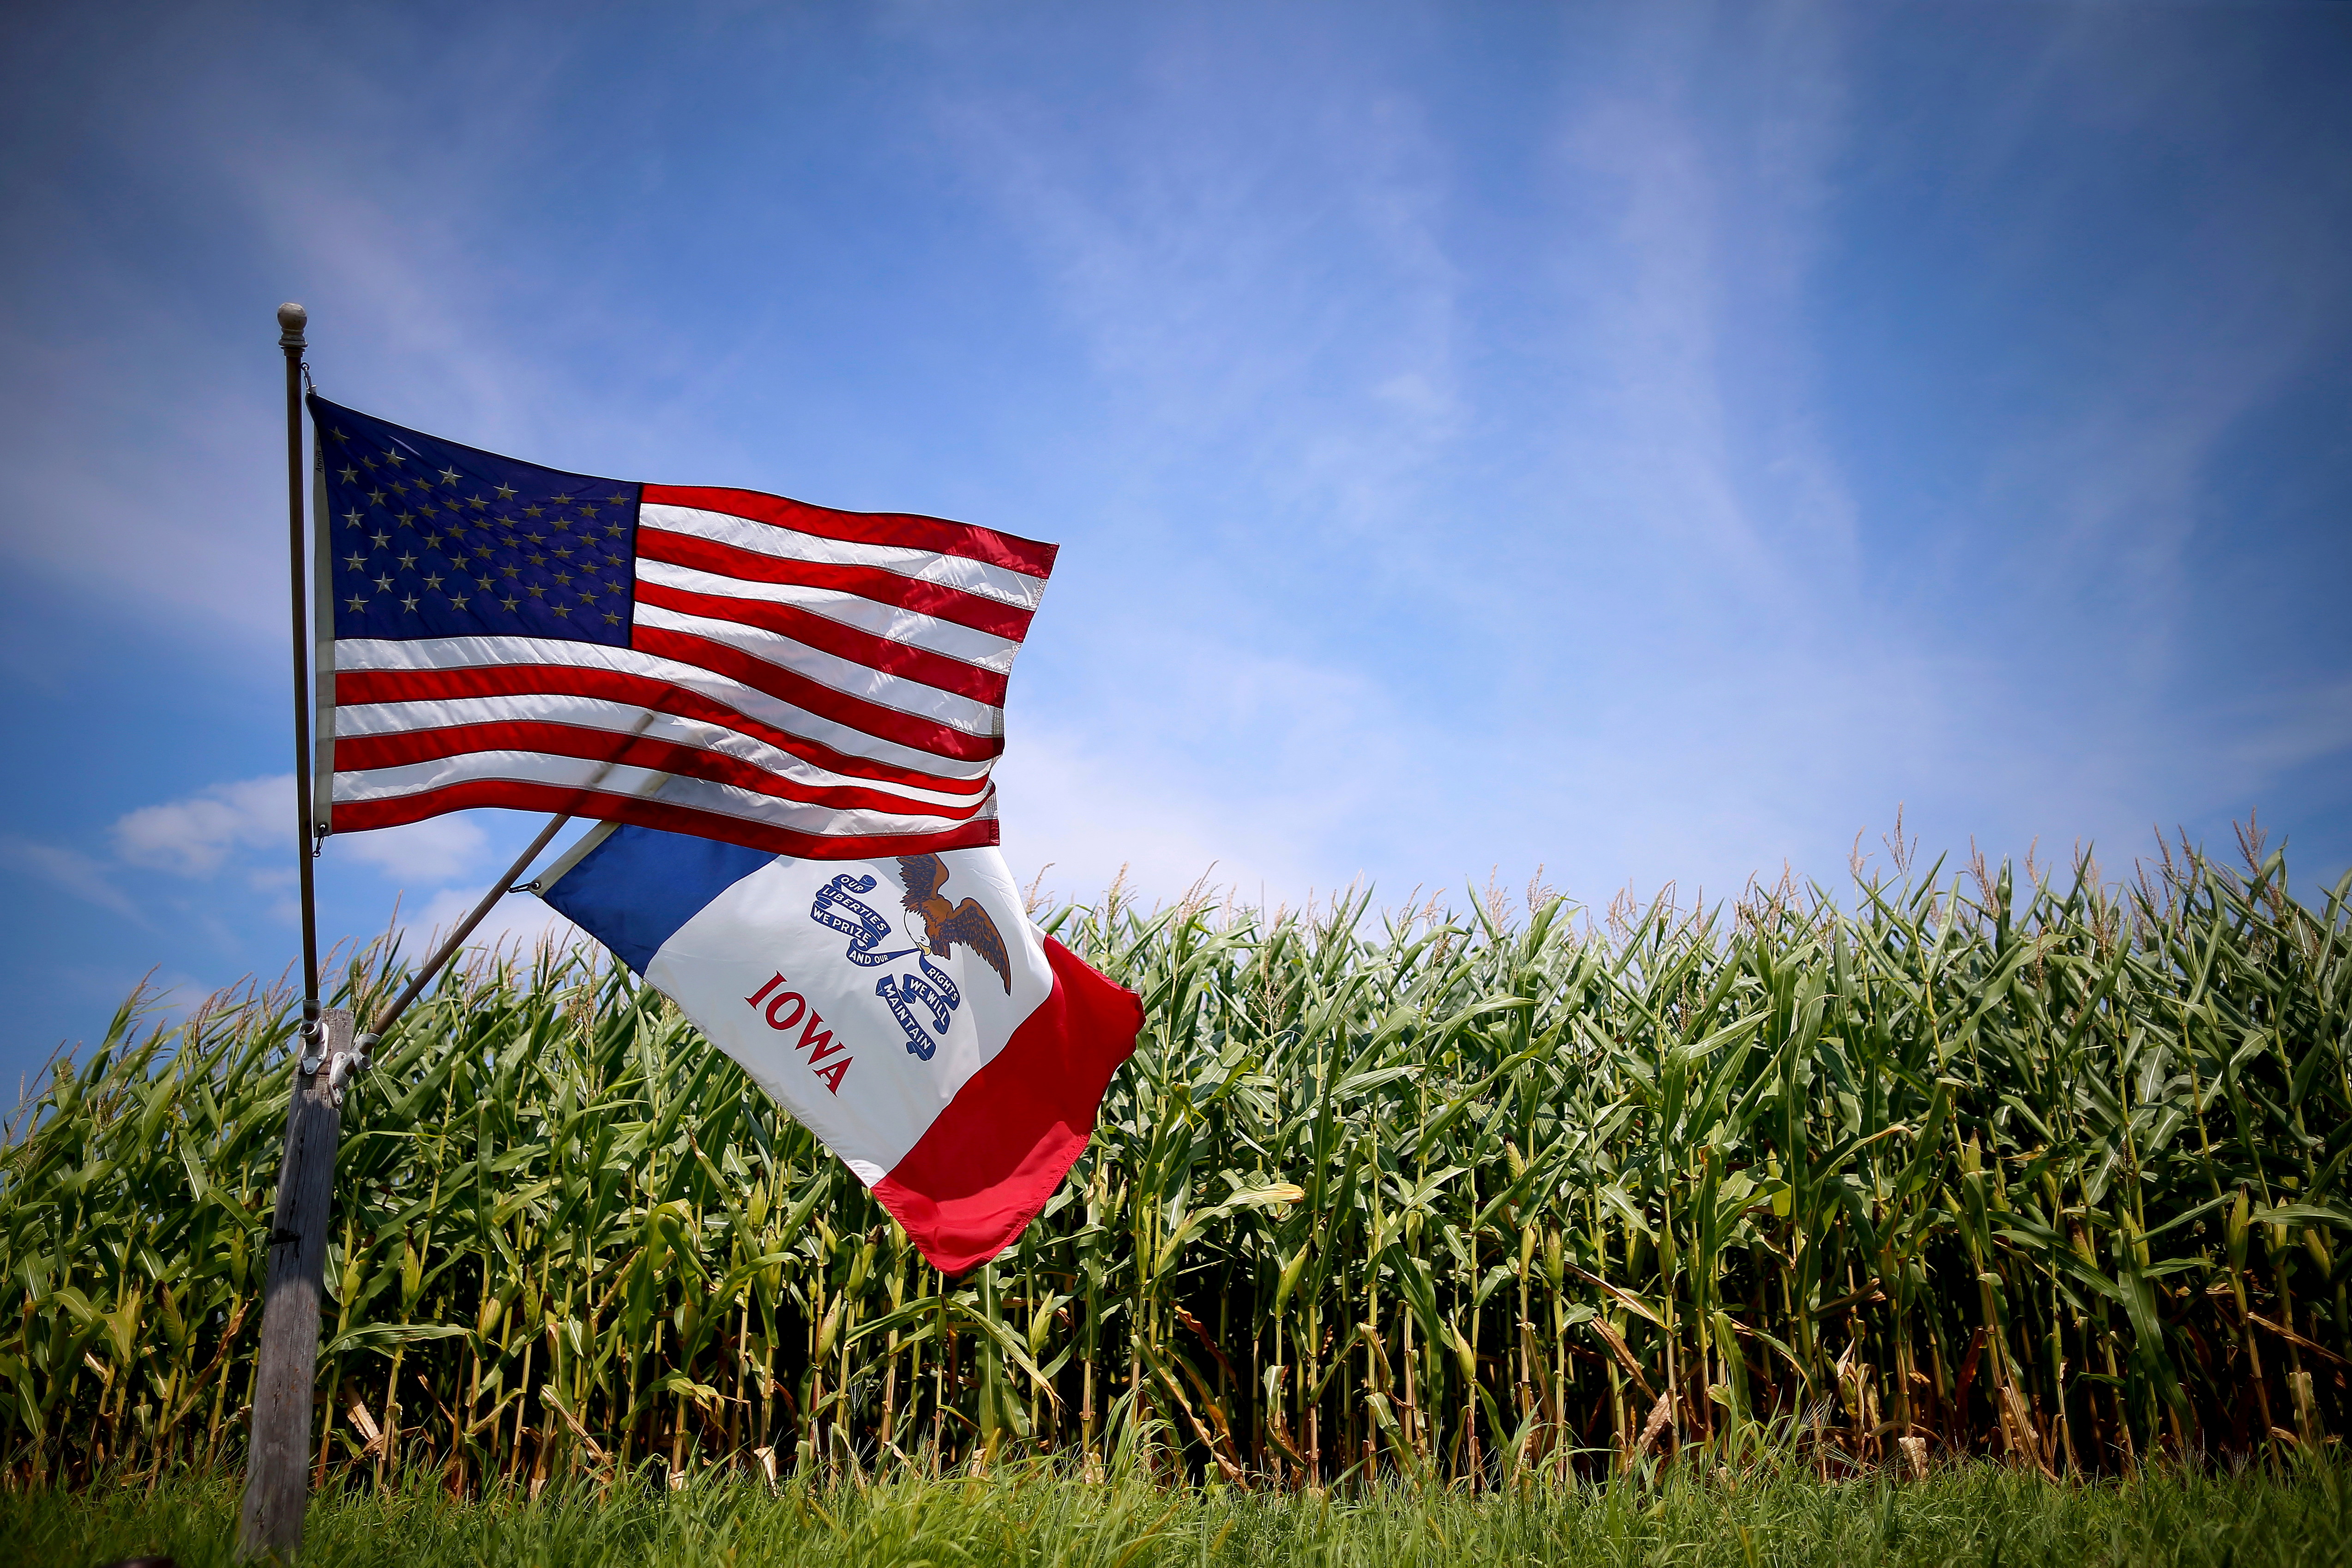 A U.S. and Iowa state flag are seen next to a corn field in Grand Mound